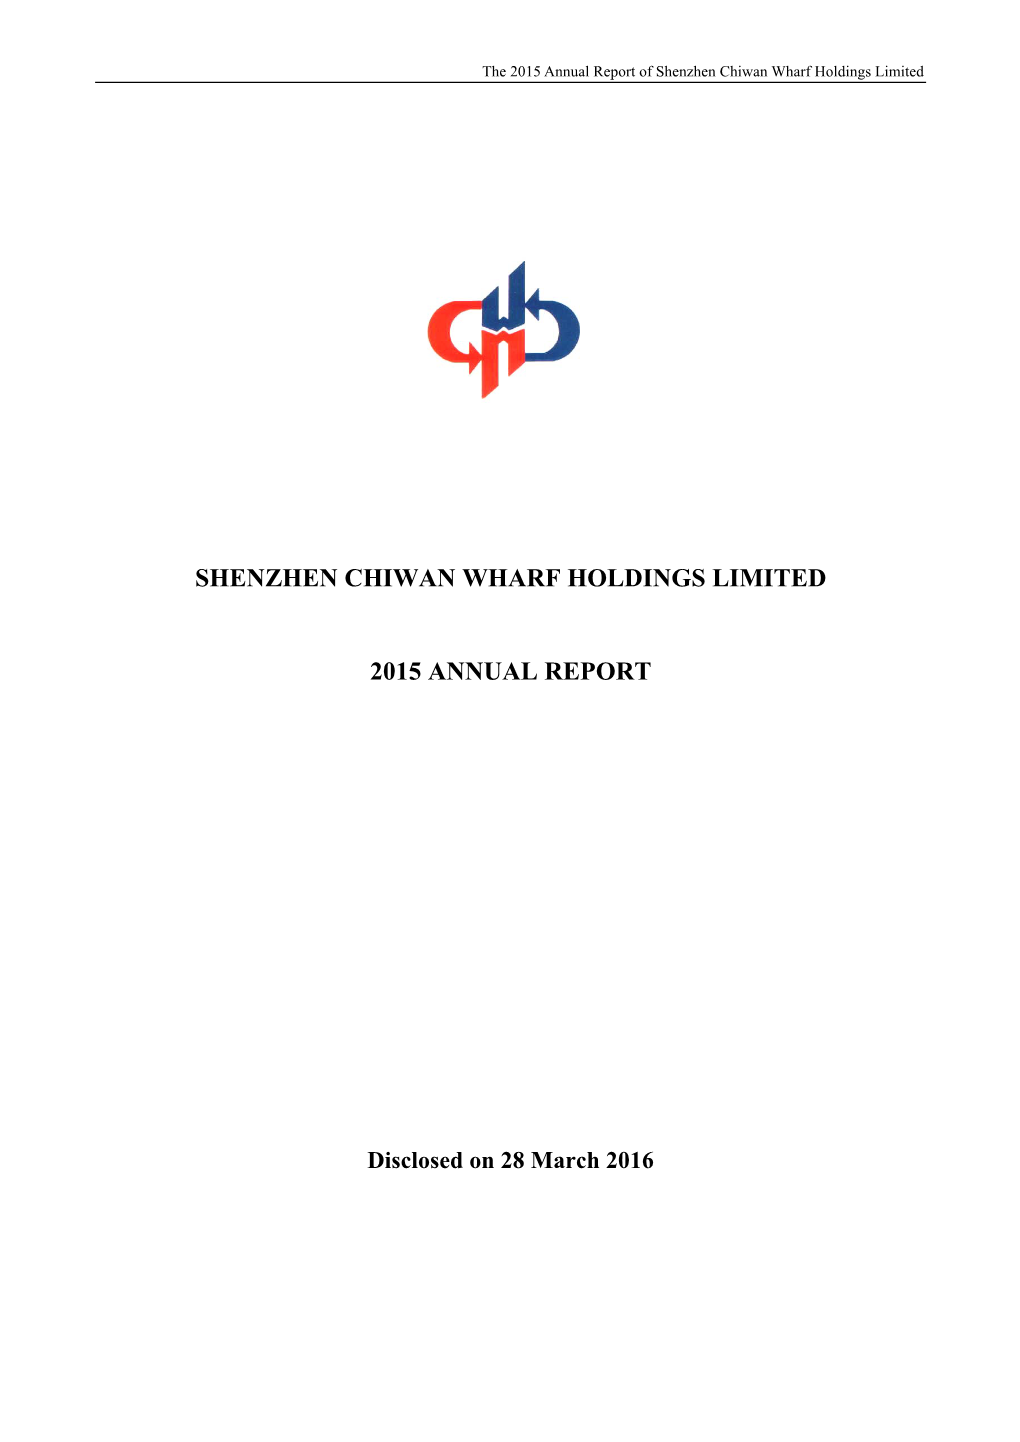 Shenzhen Chiwan Wharf Holdings Limited 2015